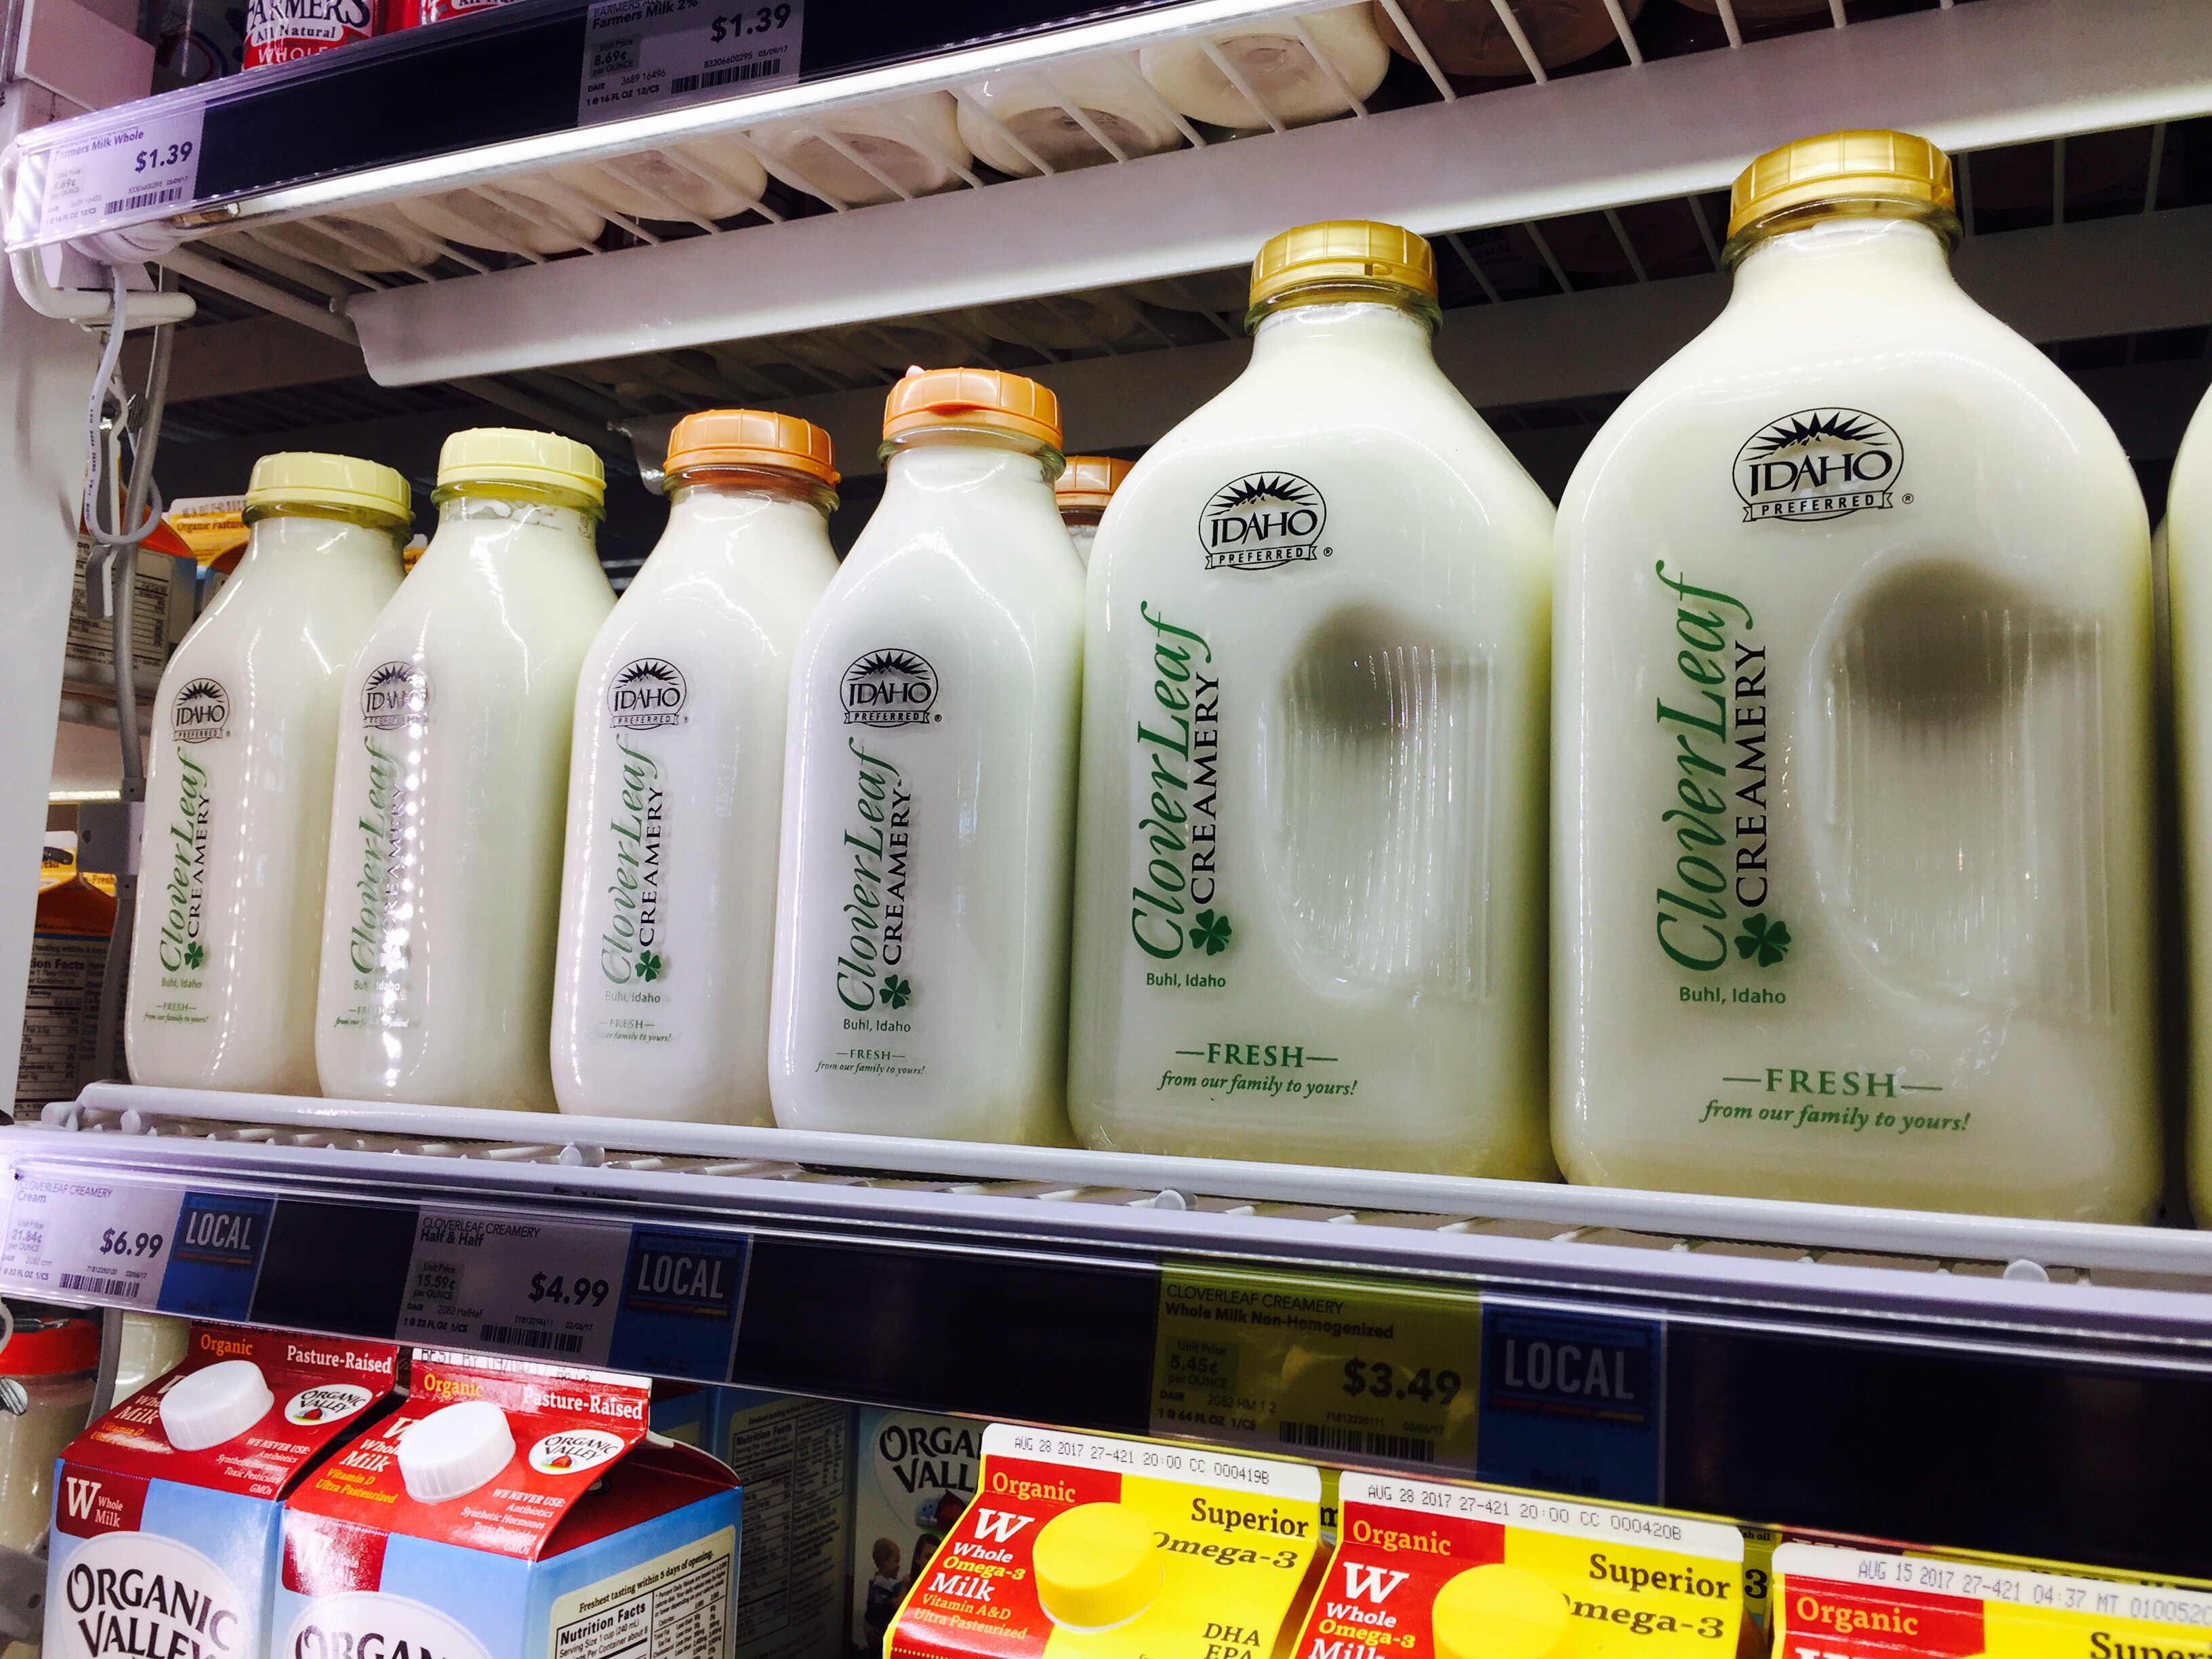 money-saving hacks at Whole Foods Market – refrigerated milk in glass bottles